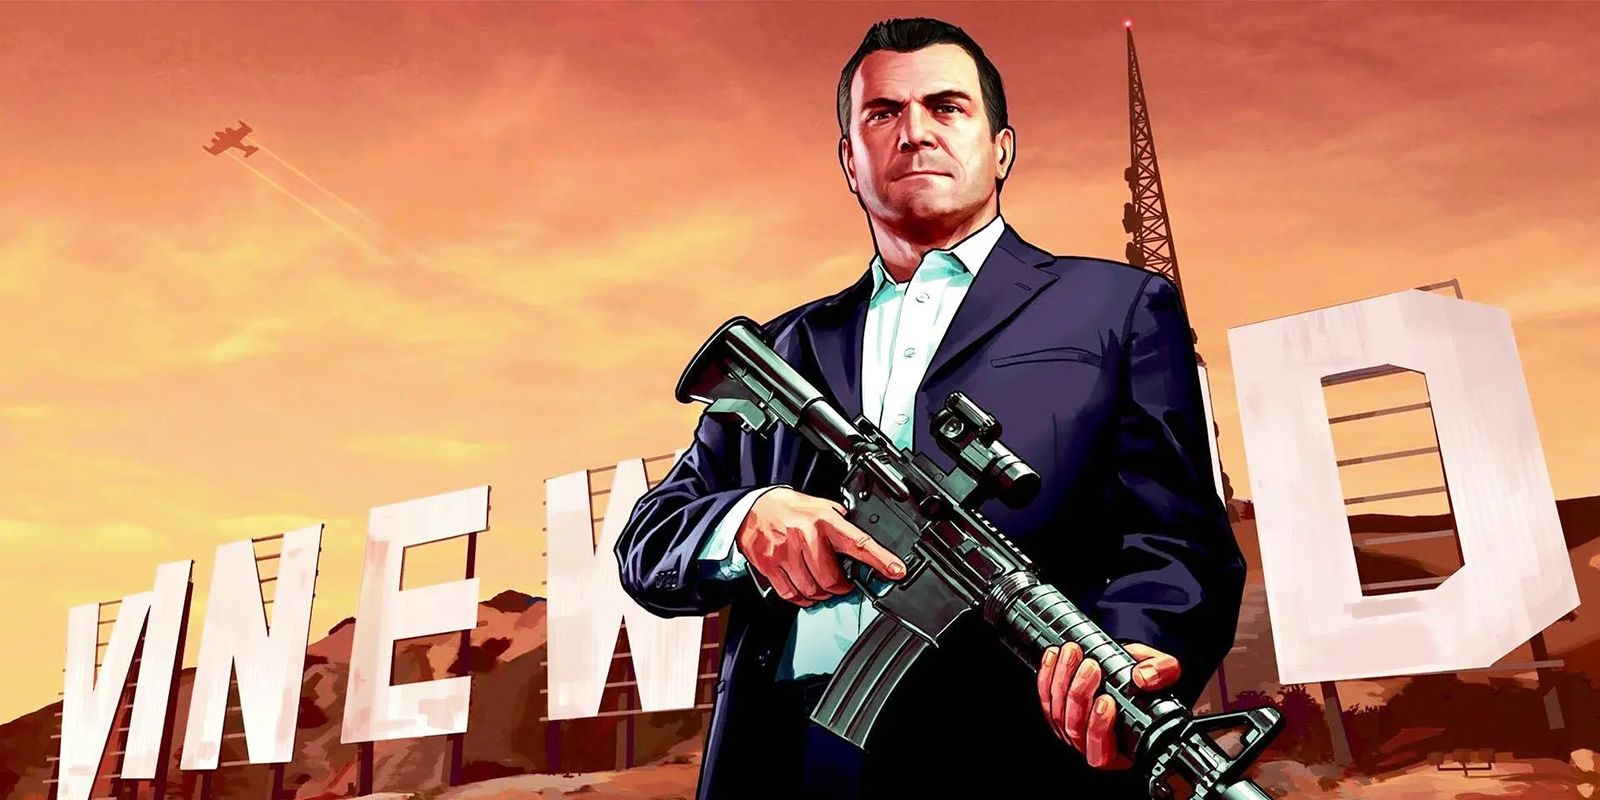 GTA 5's Michael is teasing his return in a new expansion